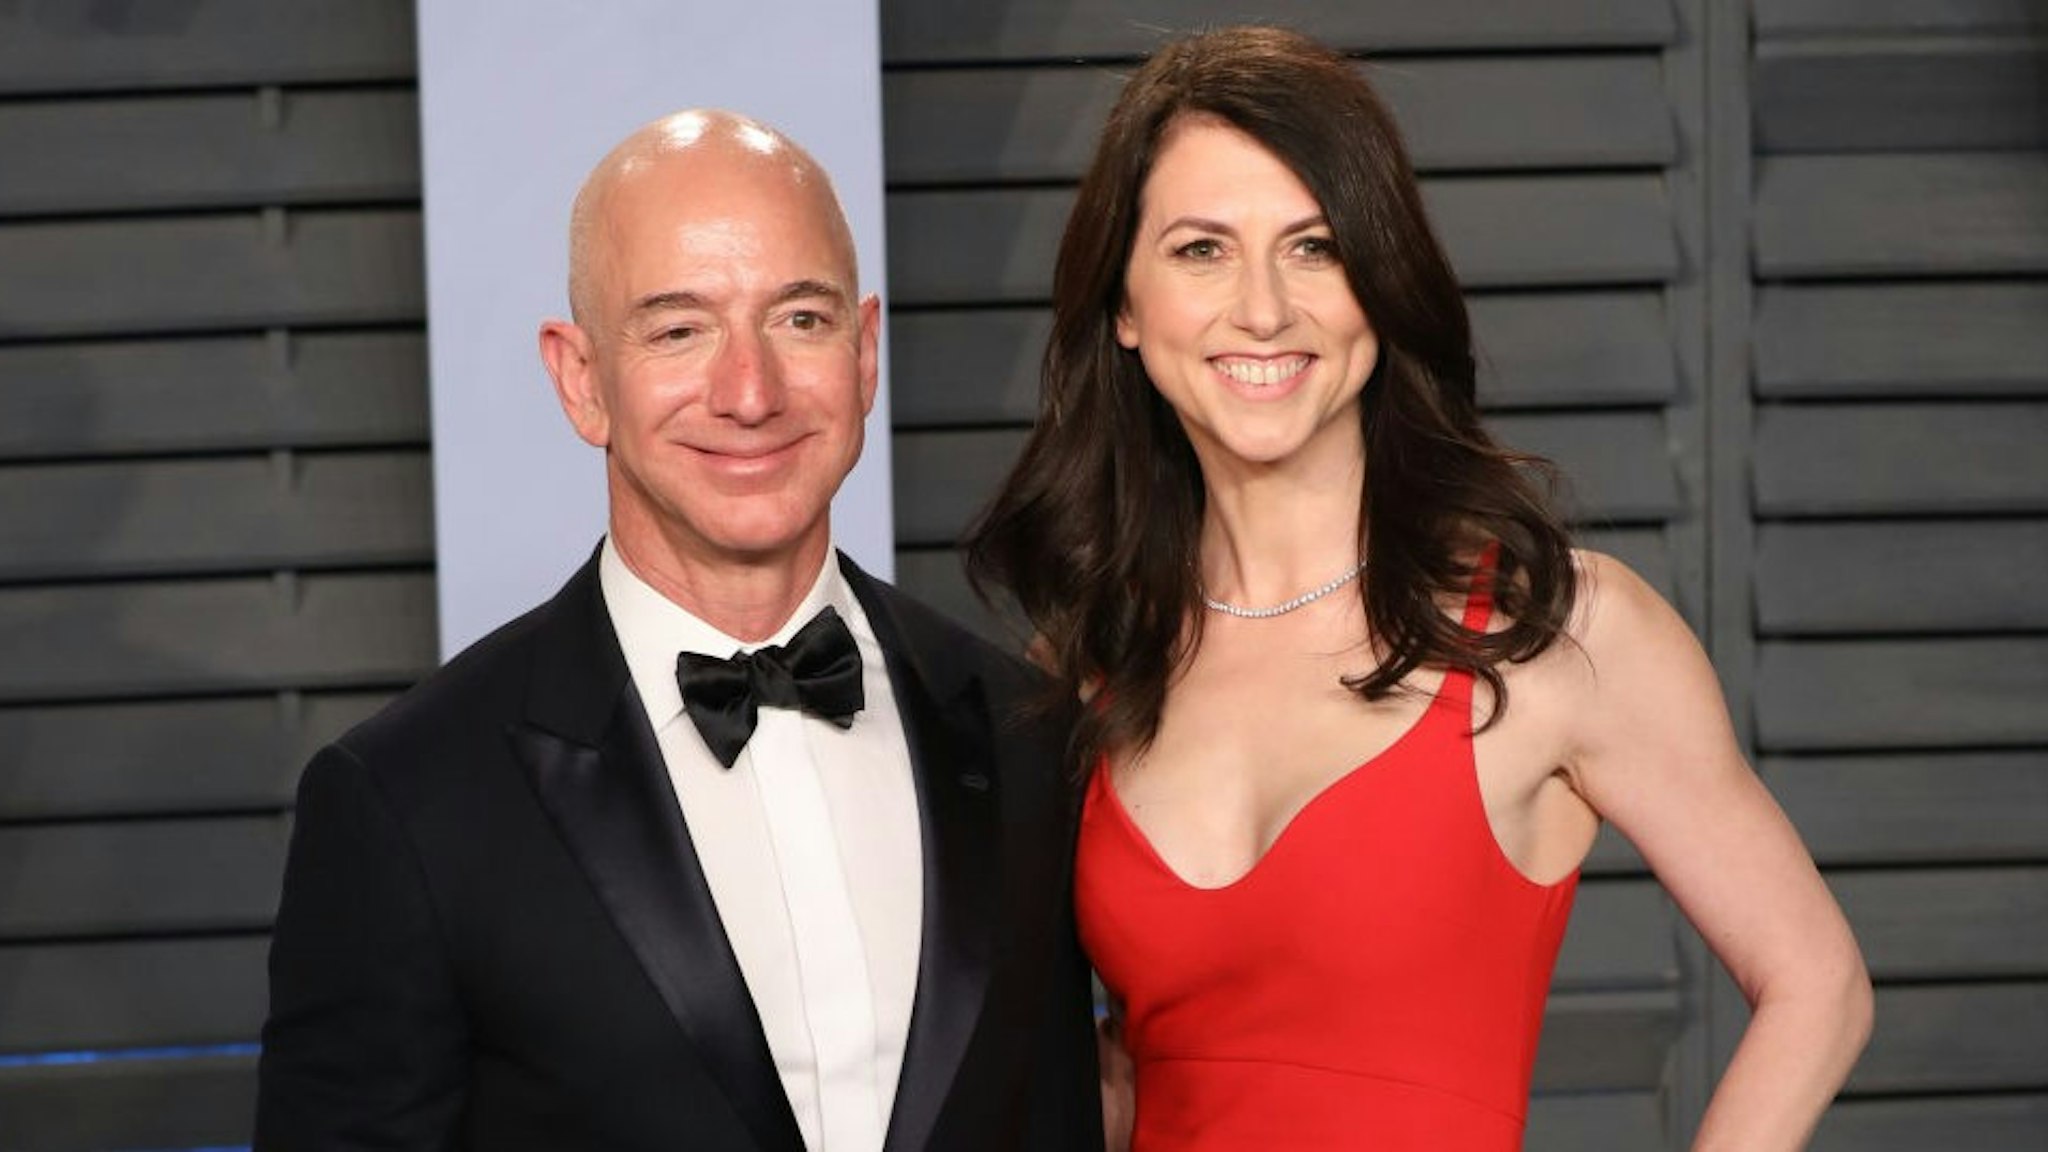 BEVERLY HILLS, CALIFORNIA - MARCH 04: Jeff Bezos (L) and MacKenzie Bezos attends the 2018 Vanity Fair Oscar Party hosted by Radhika Jones at Wallis Annenberg Center for the Performing Arts on March 04, 2018 in Beverly Hills, California. (Photo by